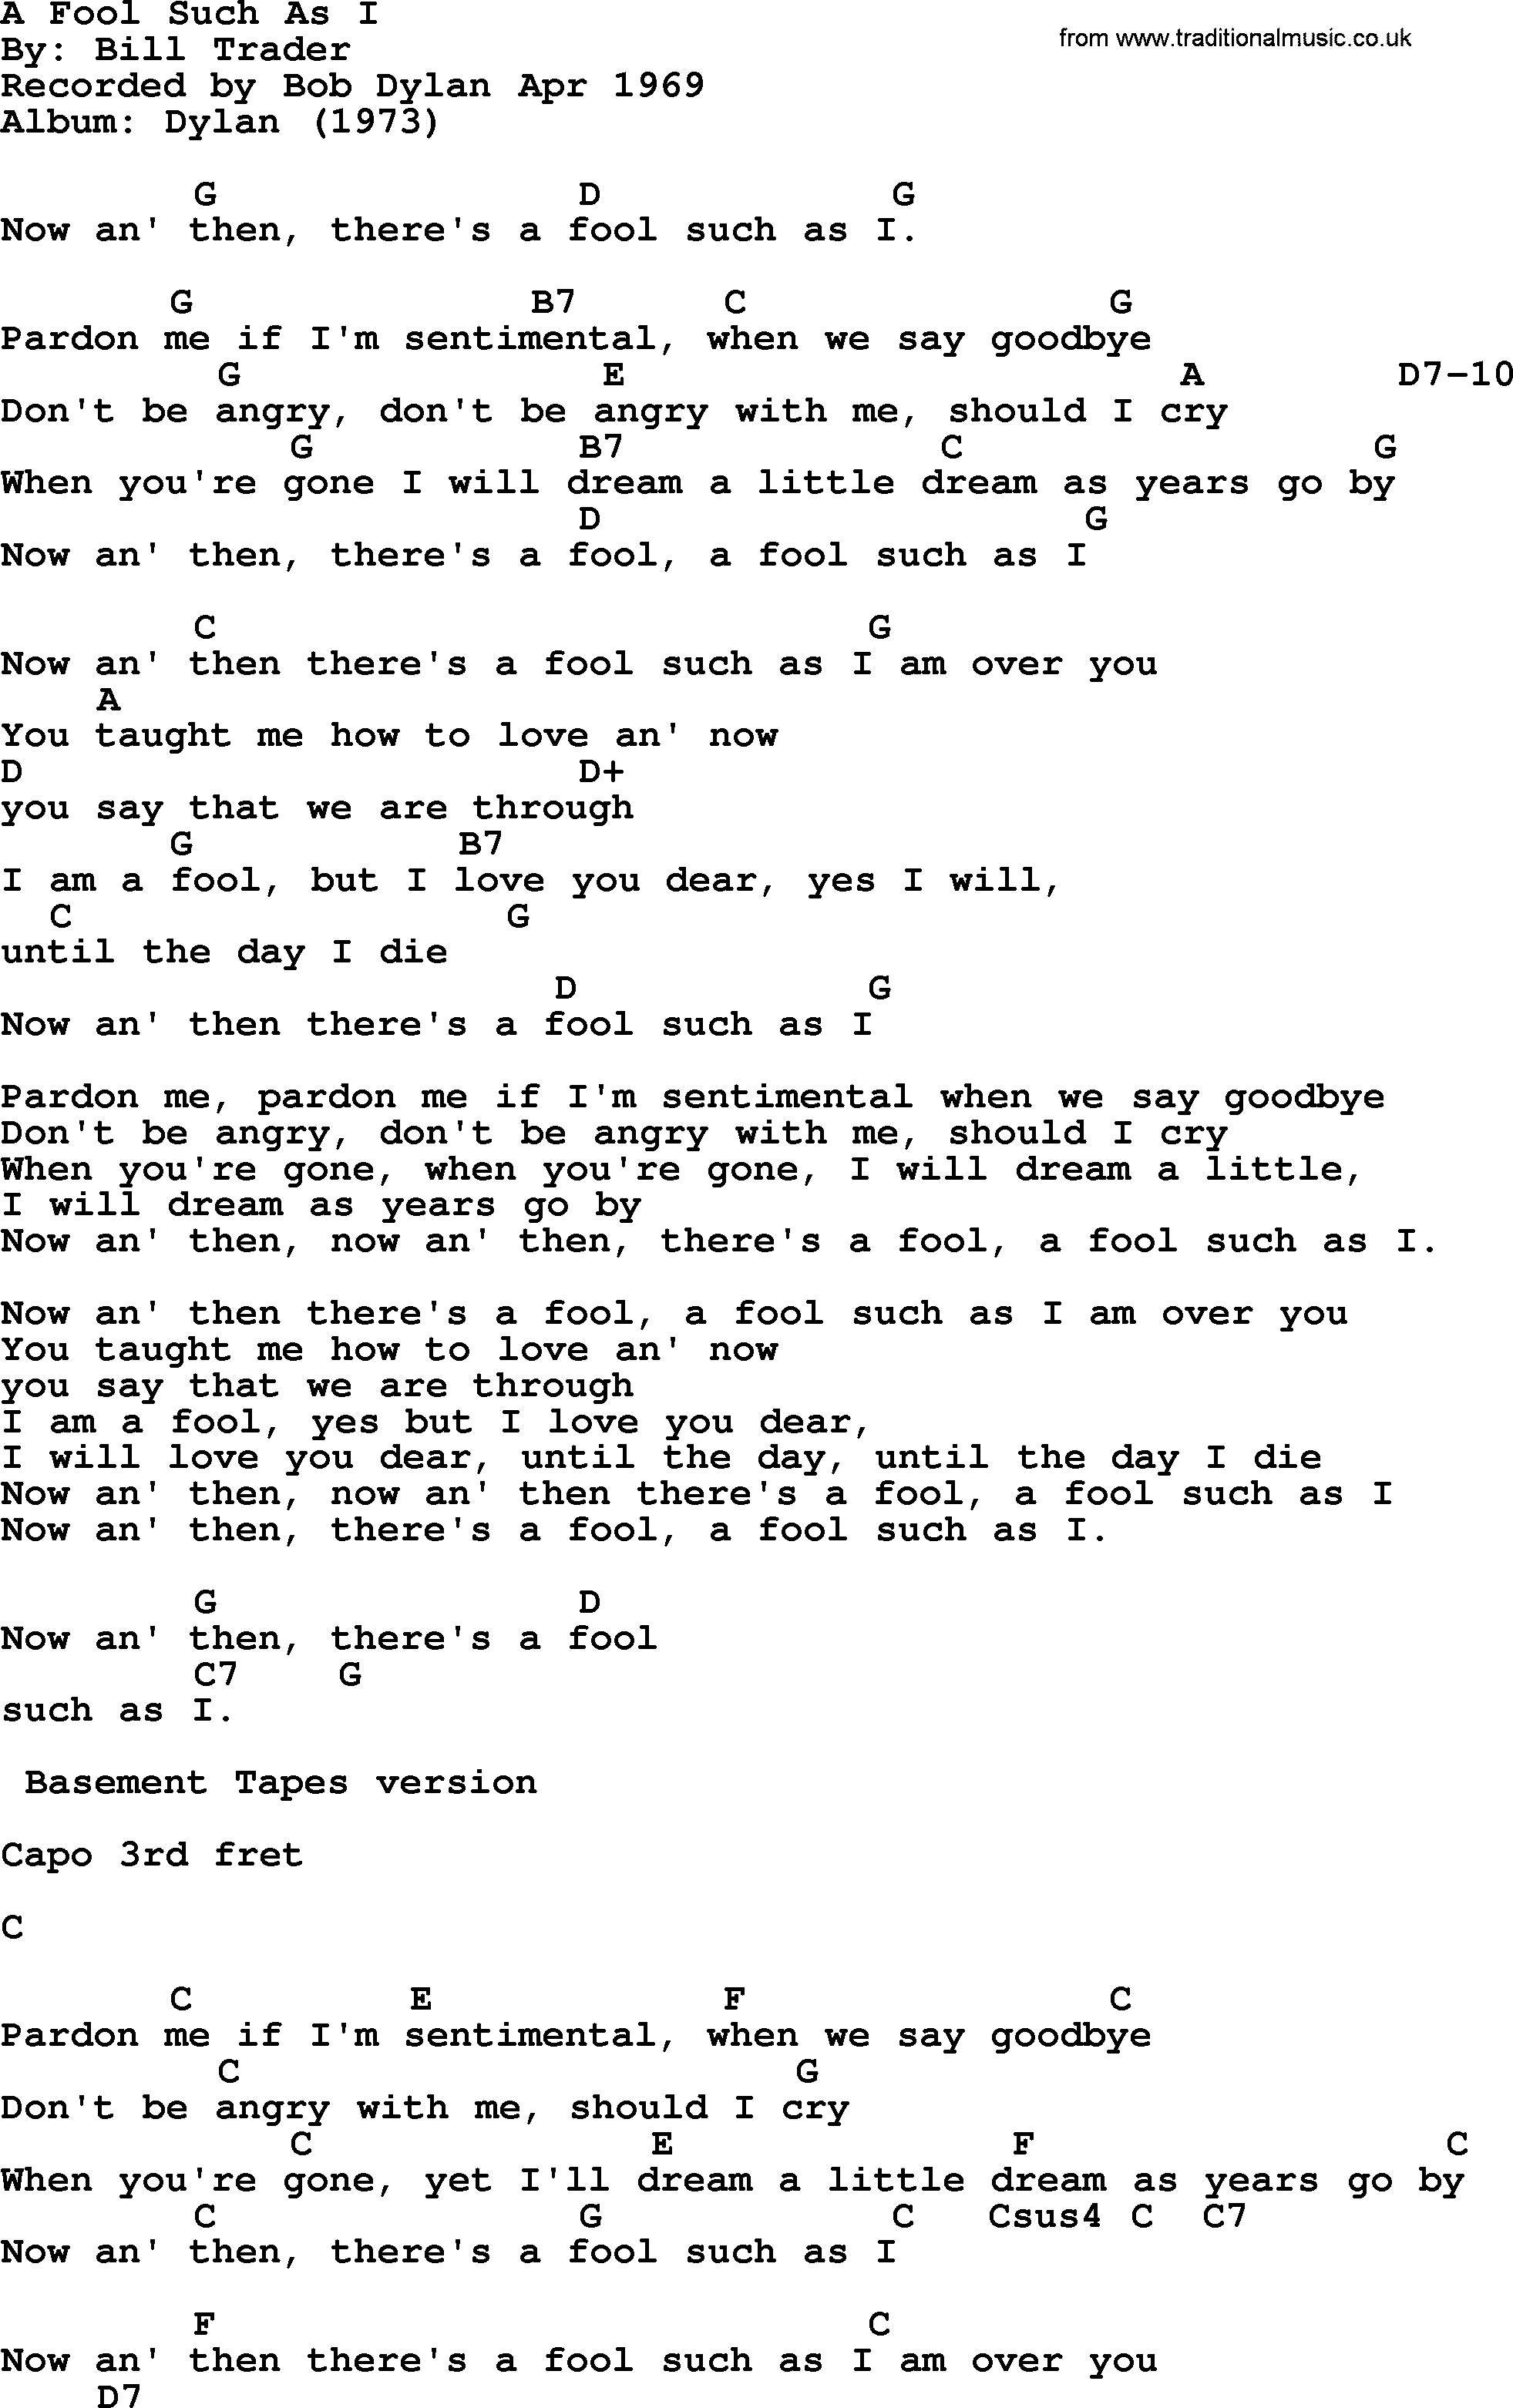 Bob Dylan song, lyrics with chords - A Fool Such As I